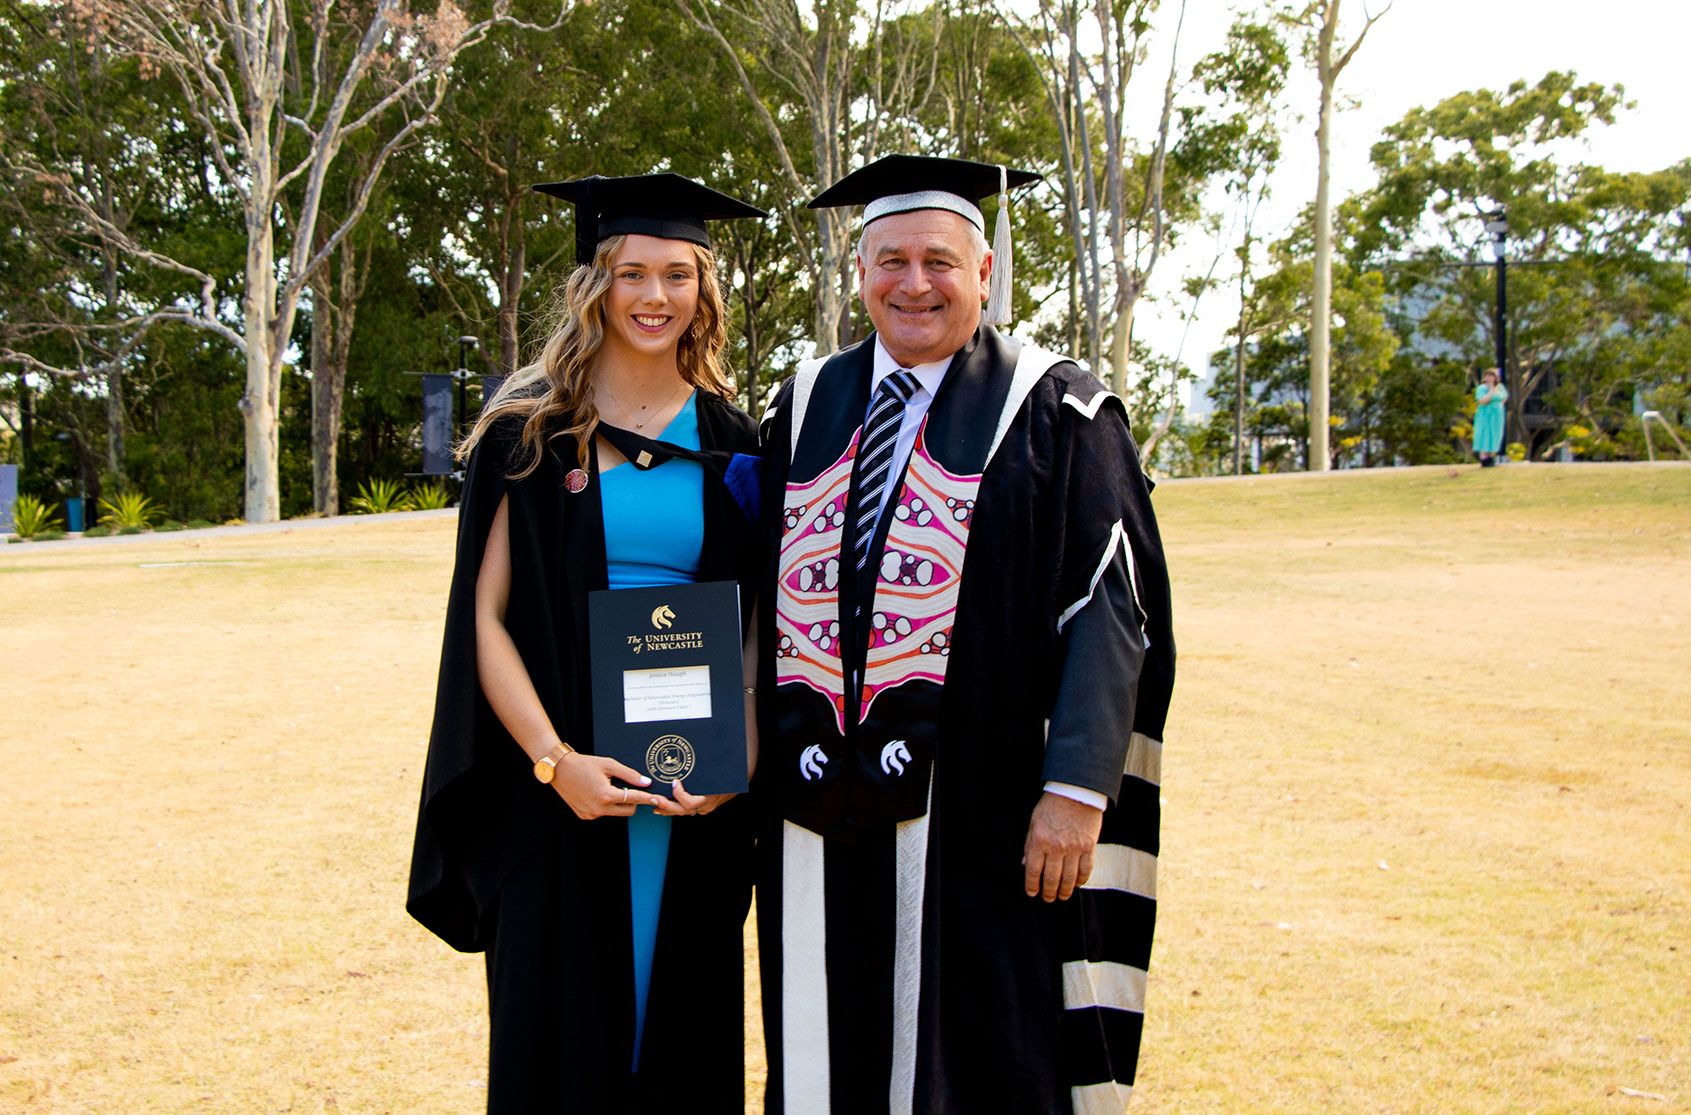 Jessica stands with her graduation certificate in her gown next to the Vice Chancellor in his official dress